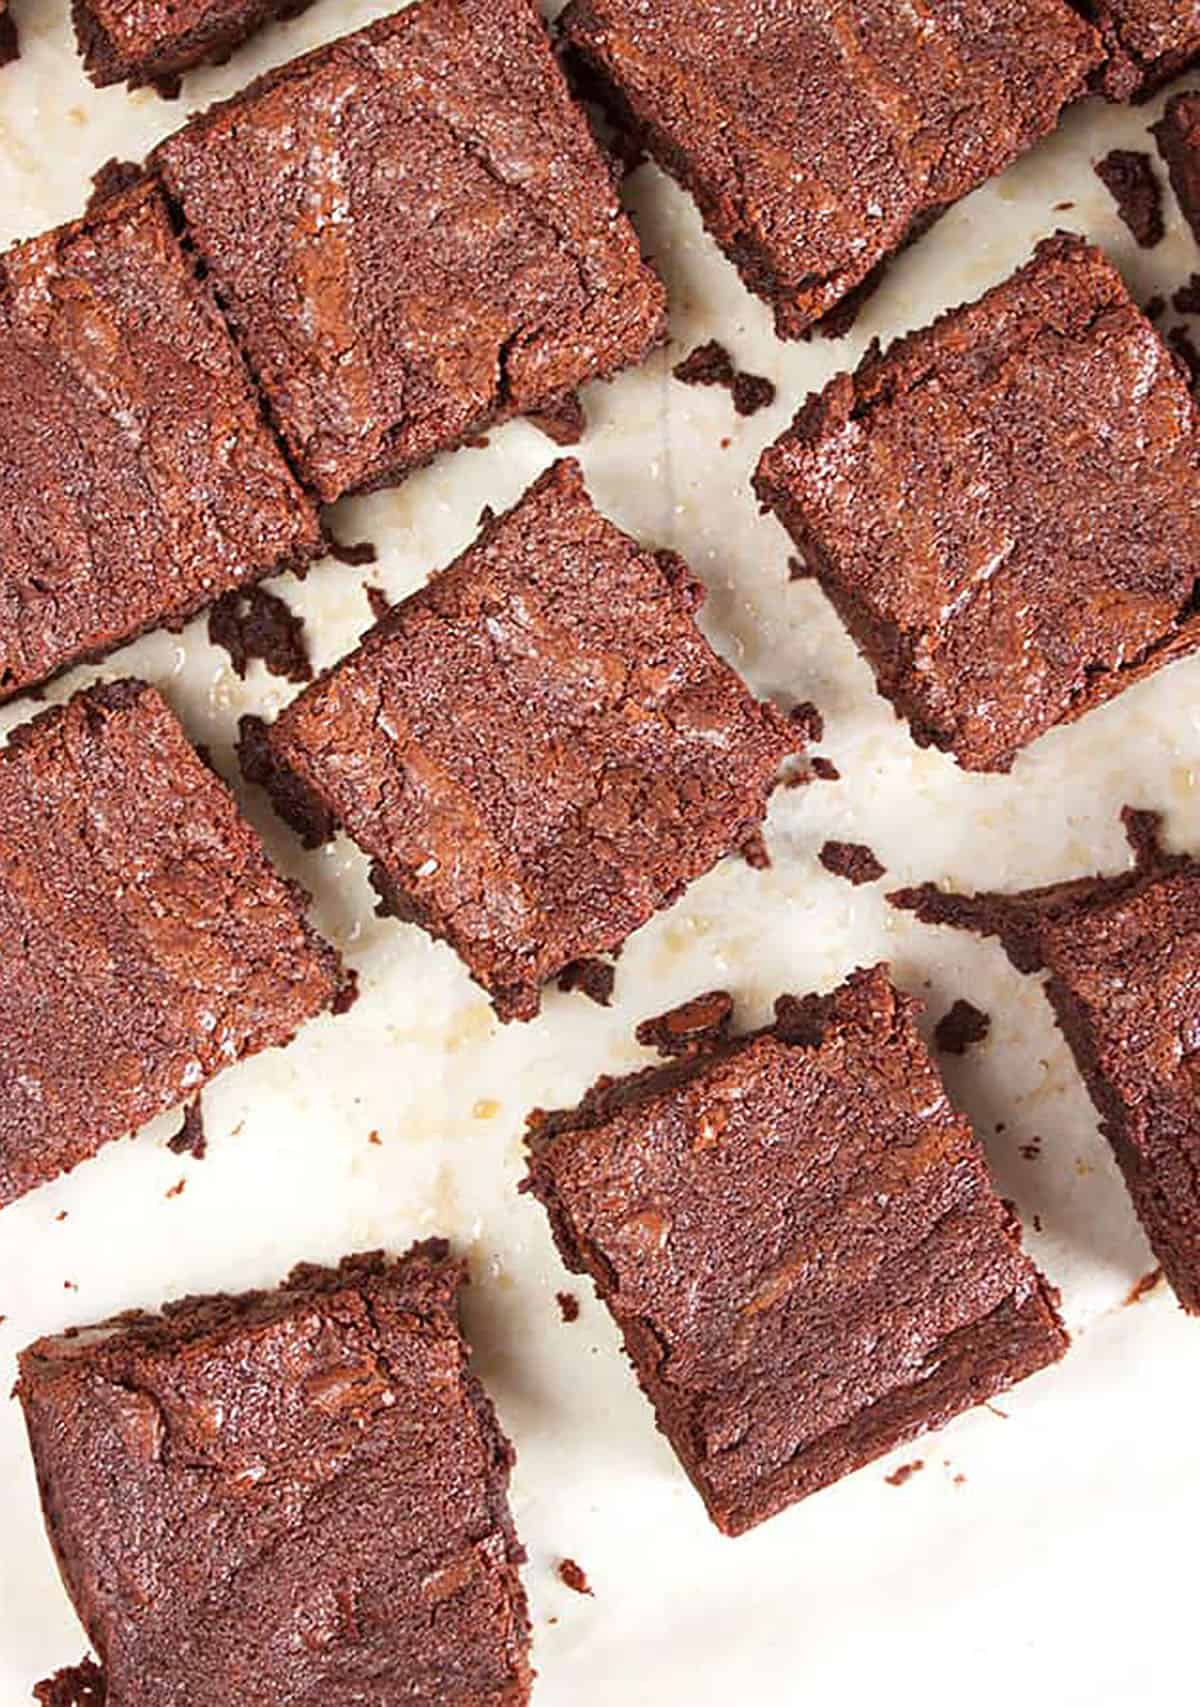 Brownie squares on a piece of parchment paper with brownie crumbs in between the slices.